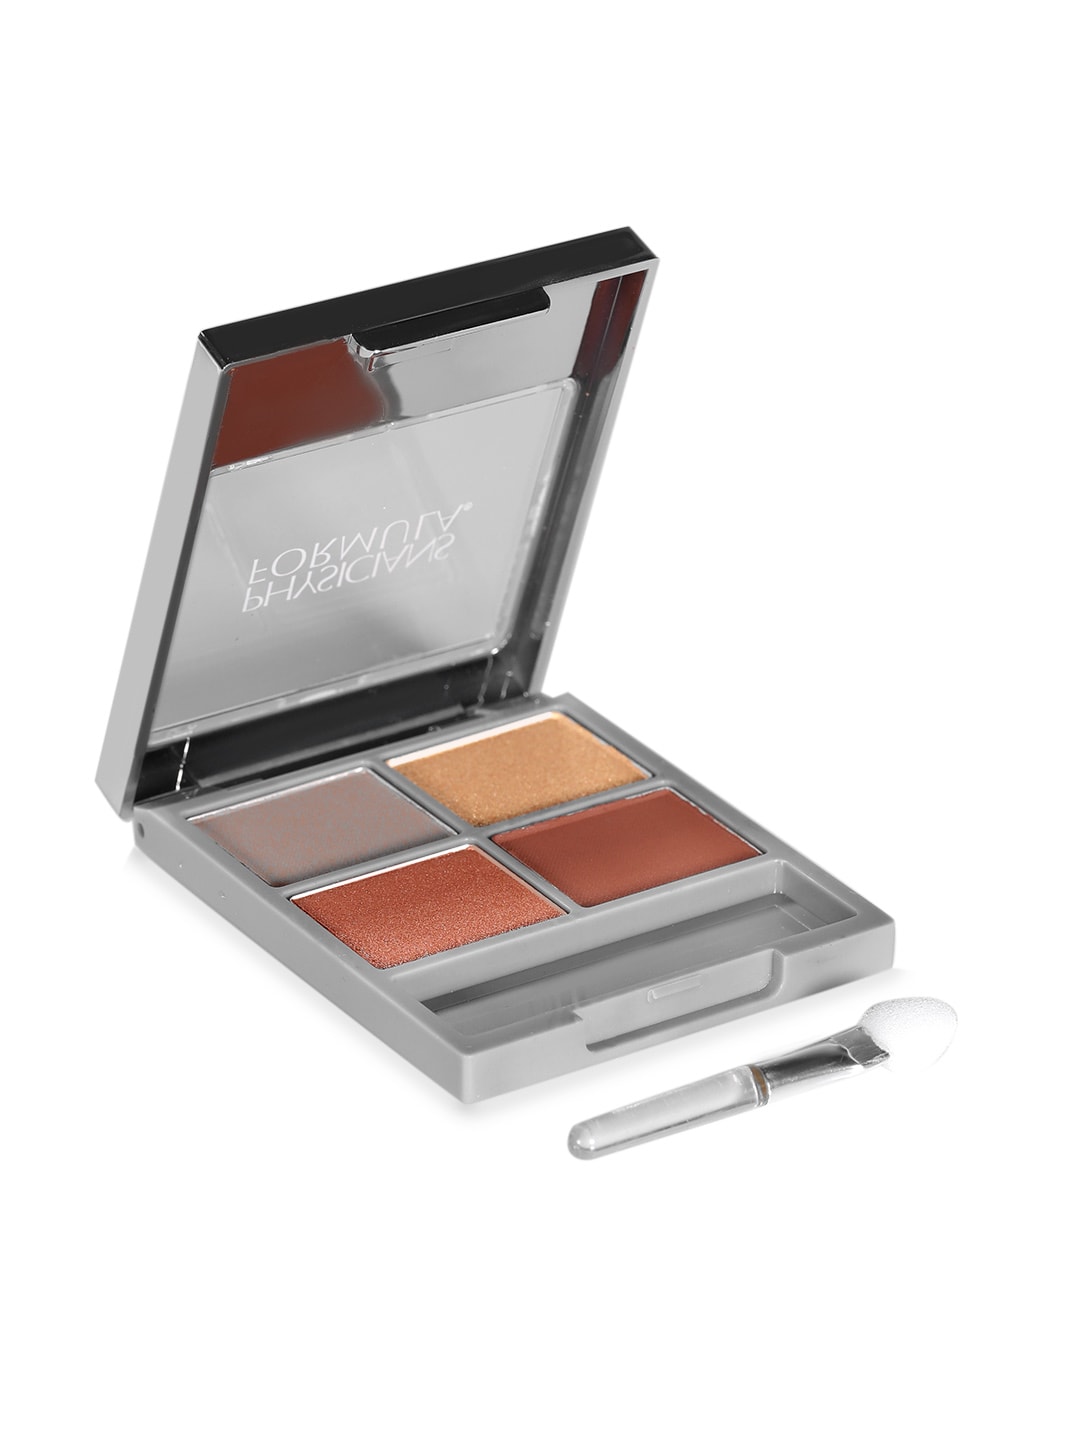 Physicians Formula Smoky Bronze The Healthy Eyeshadow Palette 6 g Price in India